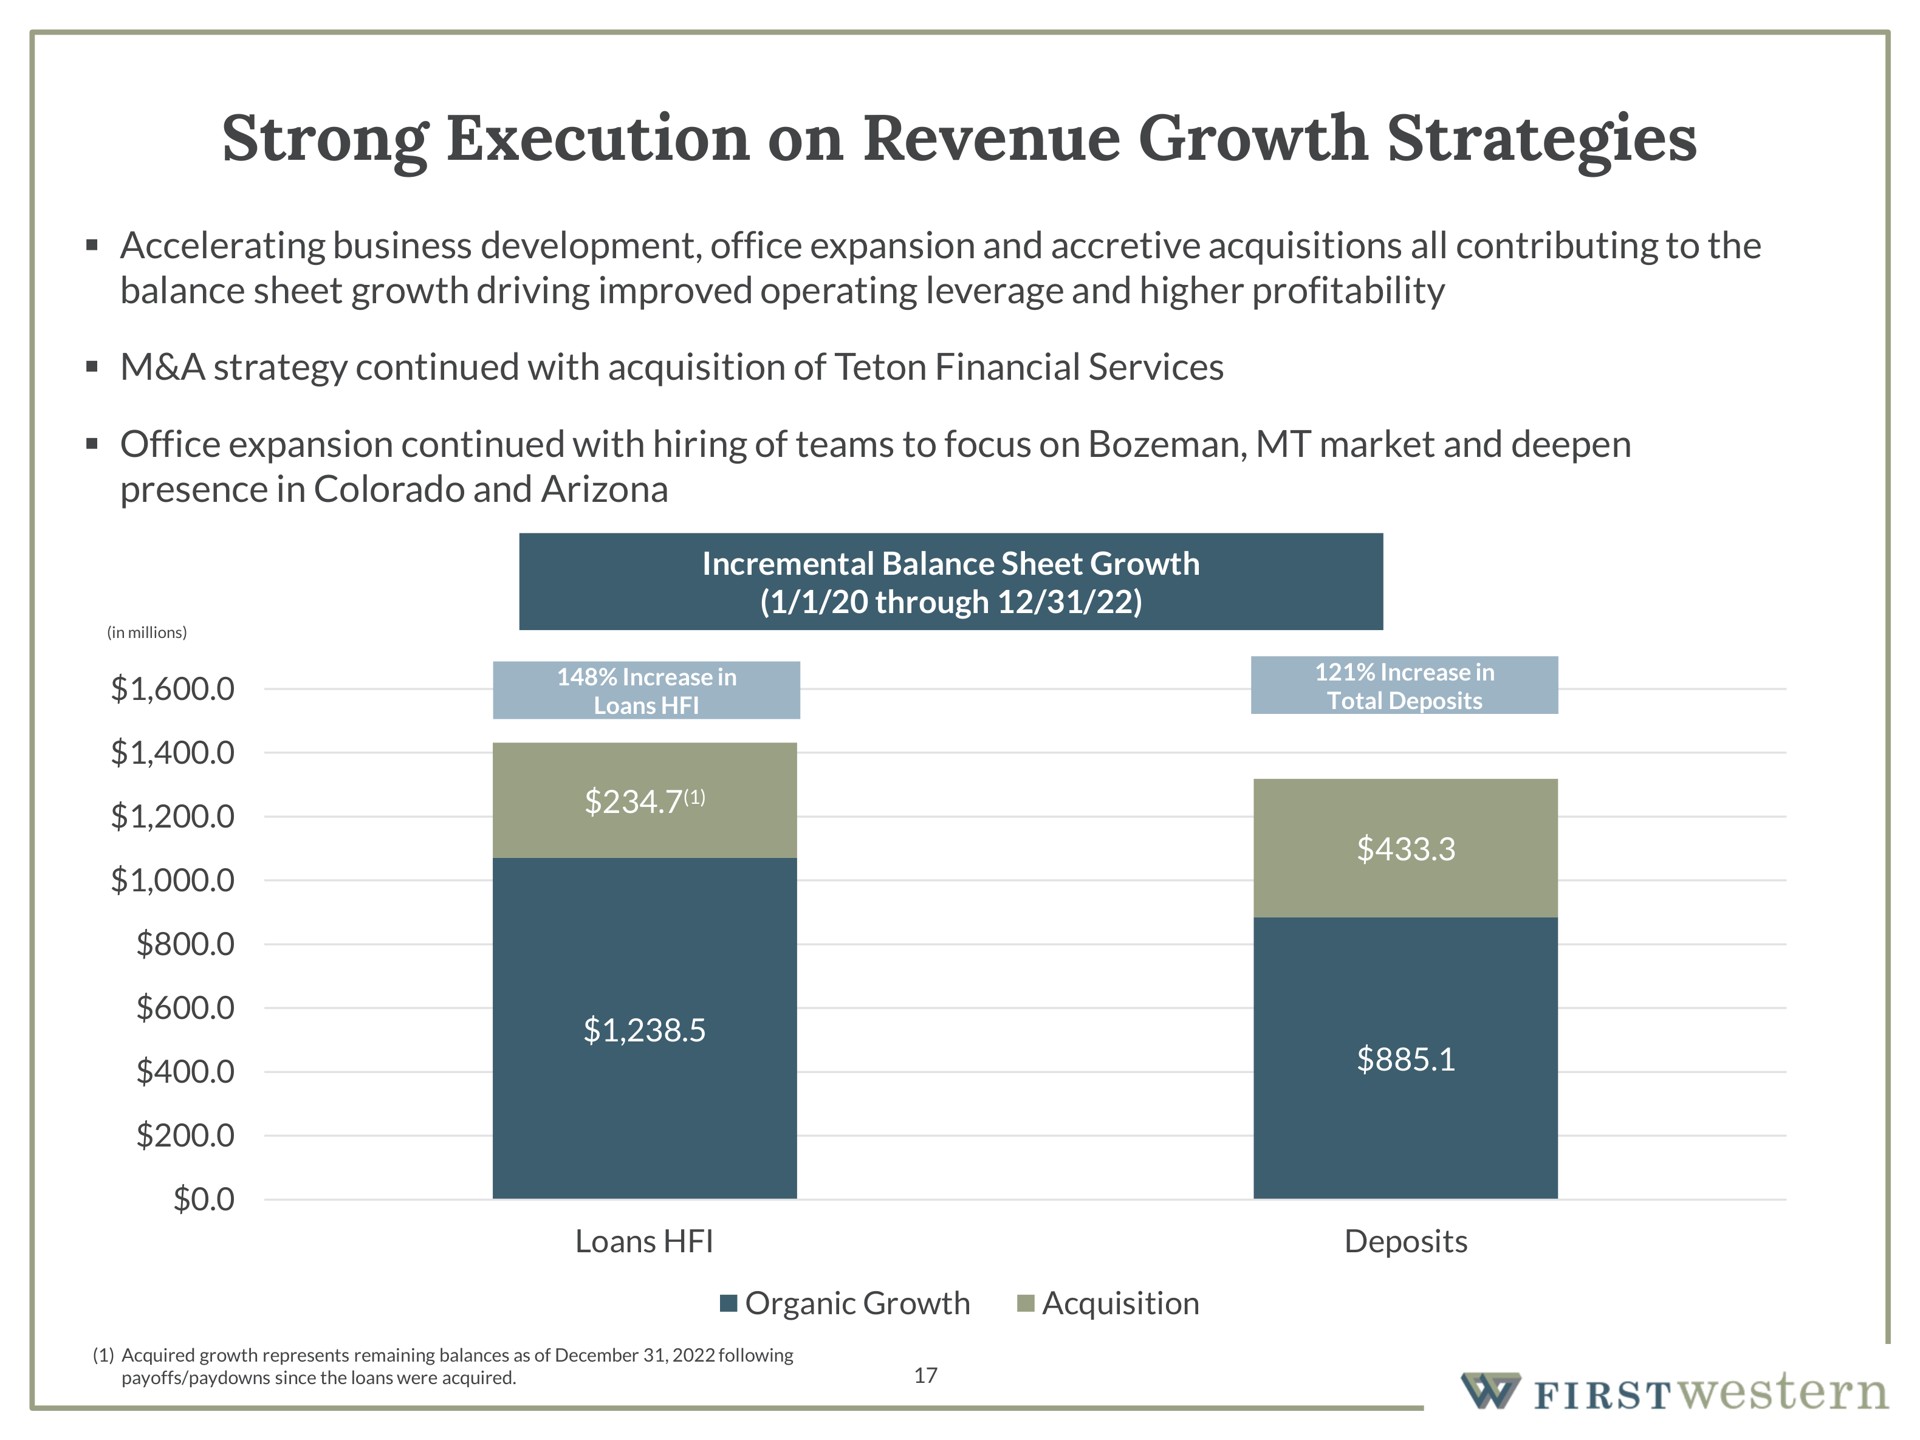 strong execution on revenue growth strategies accelerating business development office expansion and accretive acquisitions all contributing to the balance sheet growth driving improved operating leverage and higher profitability a strategy continued with acquisition of financial services office expansion continued with hiring of teams to focus on market and deepen presence in colorado and | First Western Financial